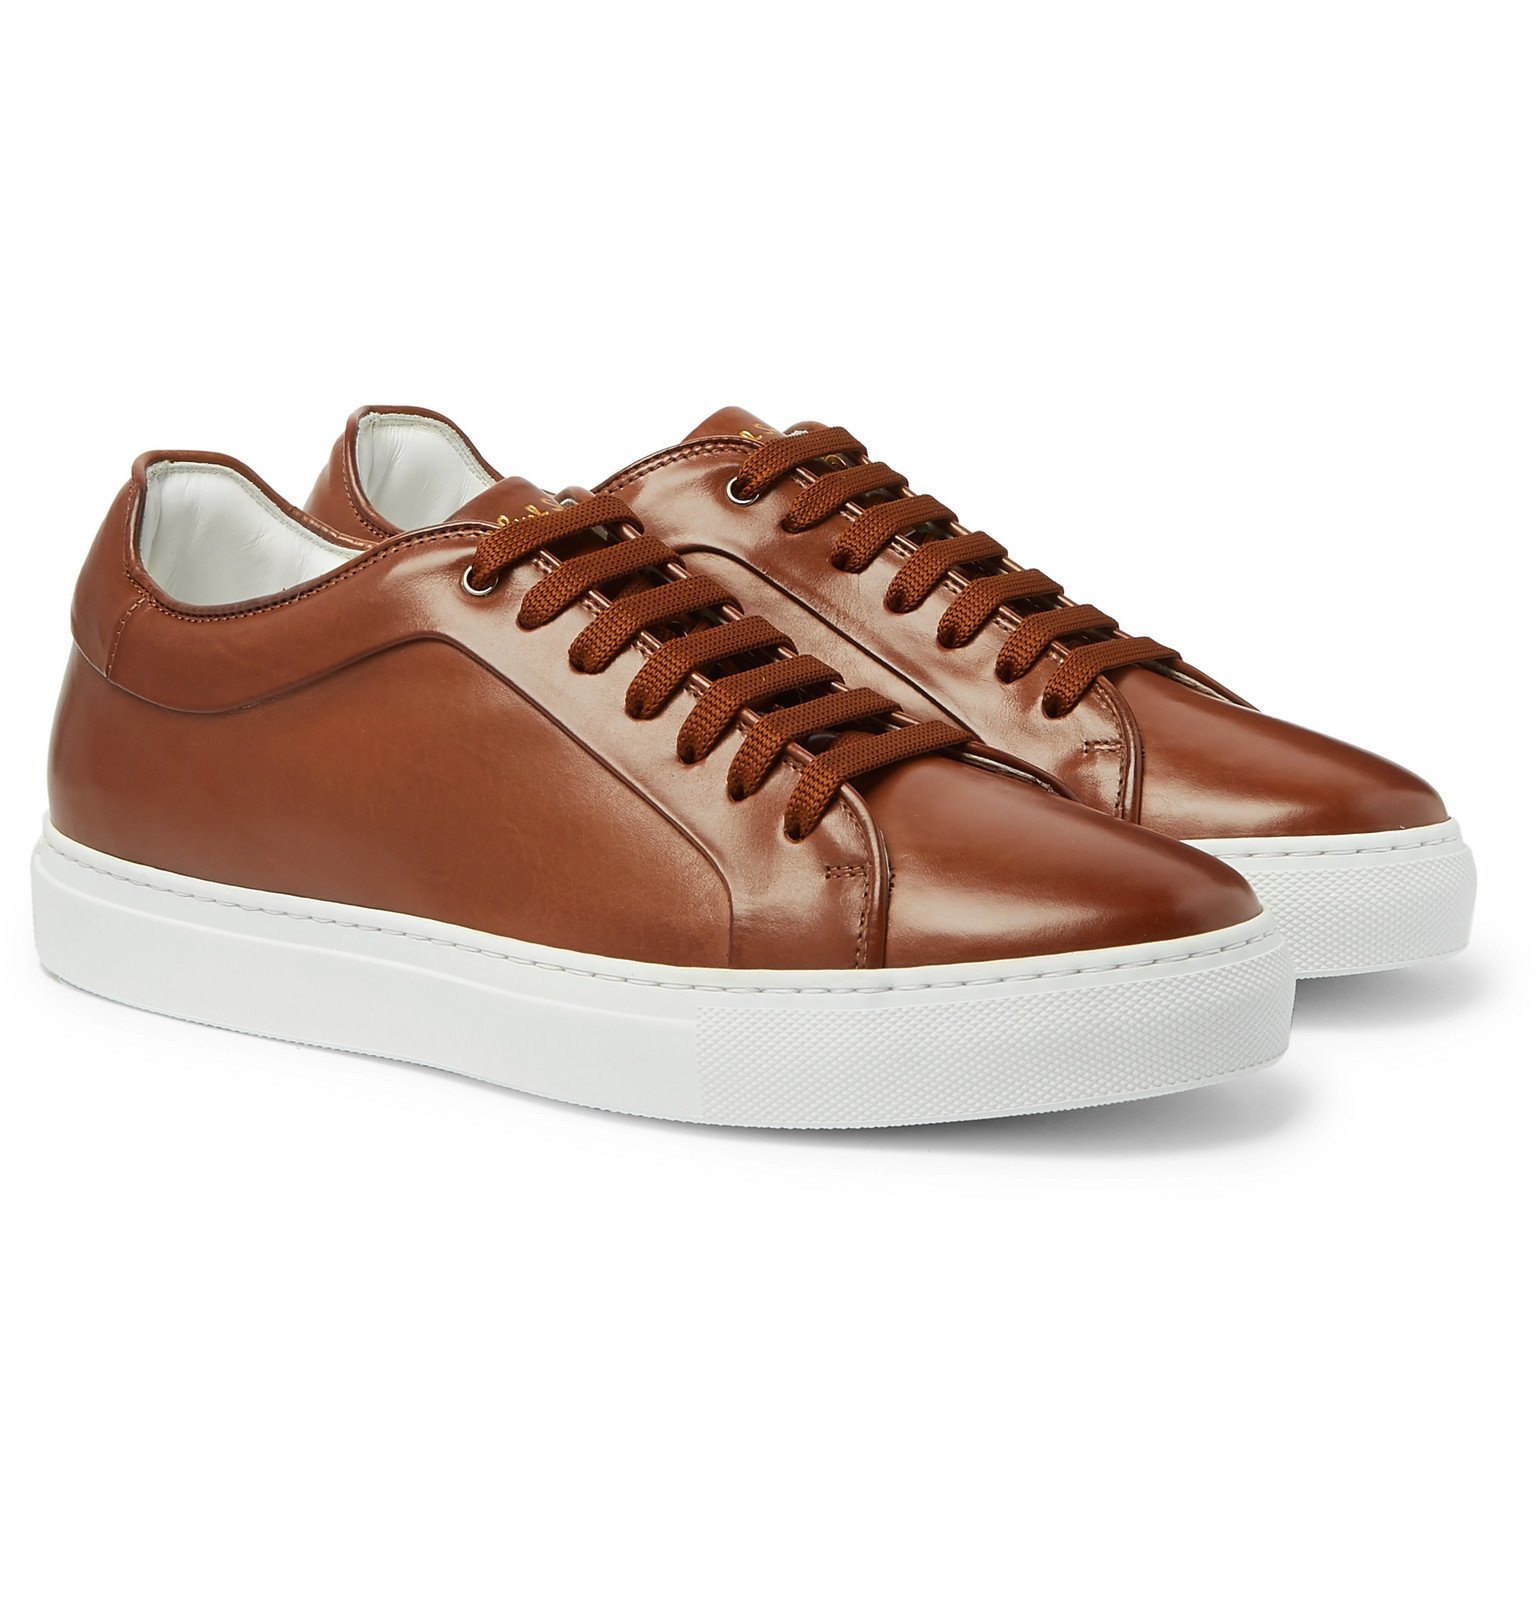 Paul Smith - Basso Burnished-Leather Sneakers - Brown Paul Smith